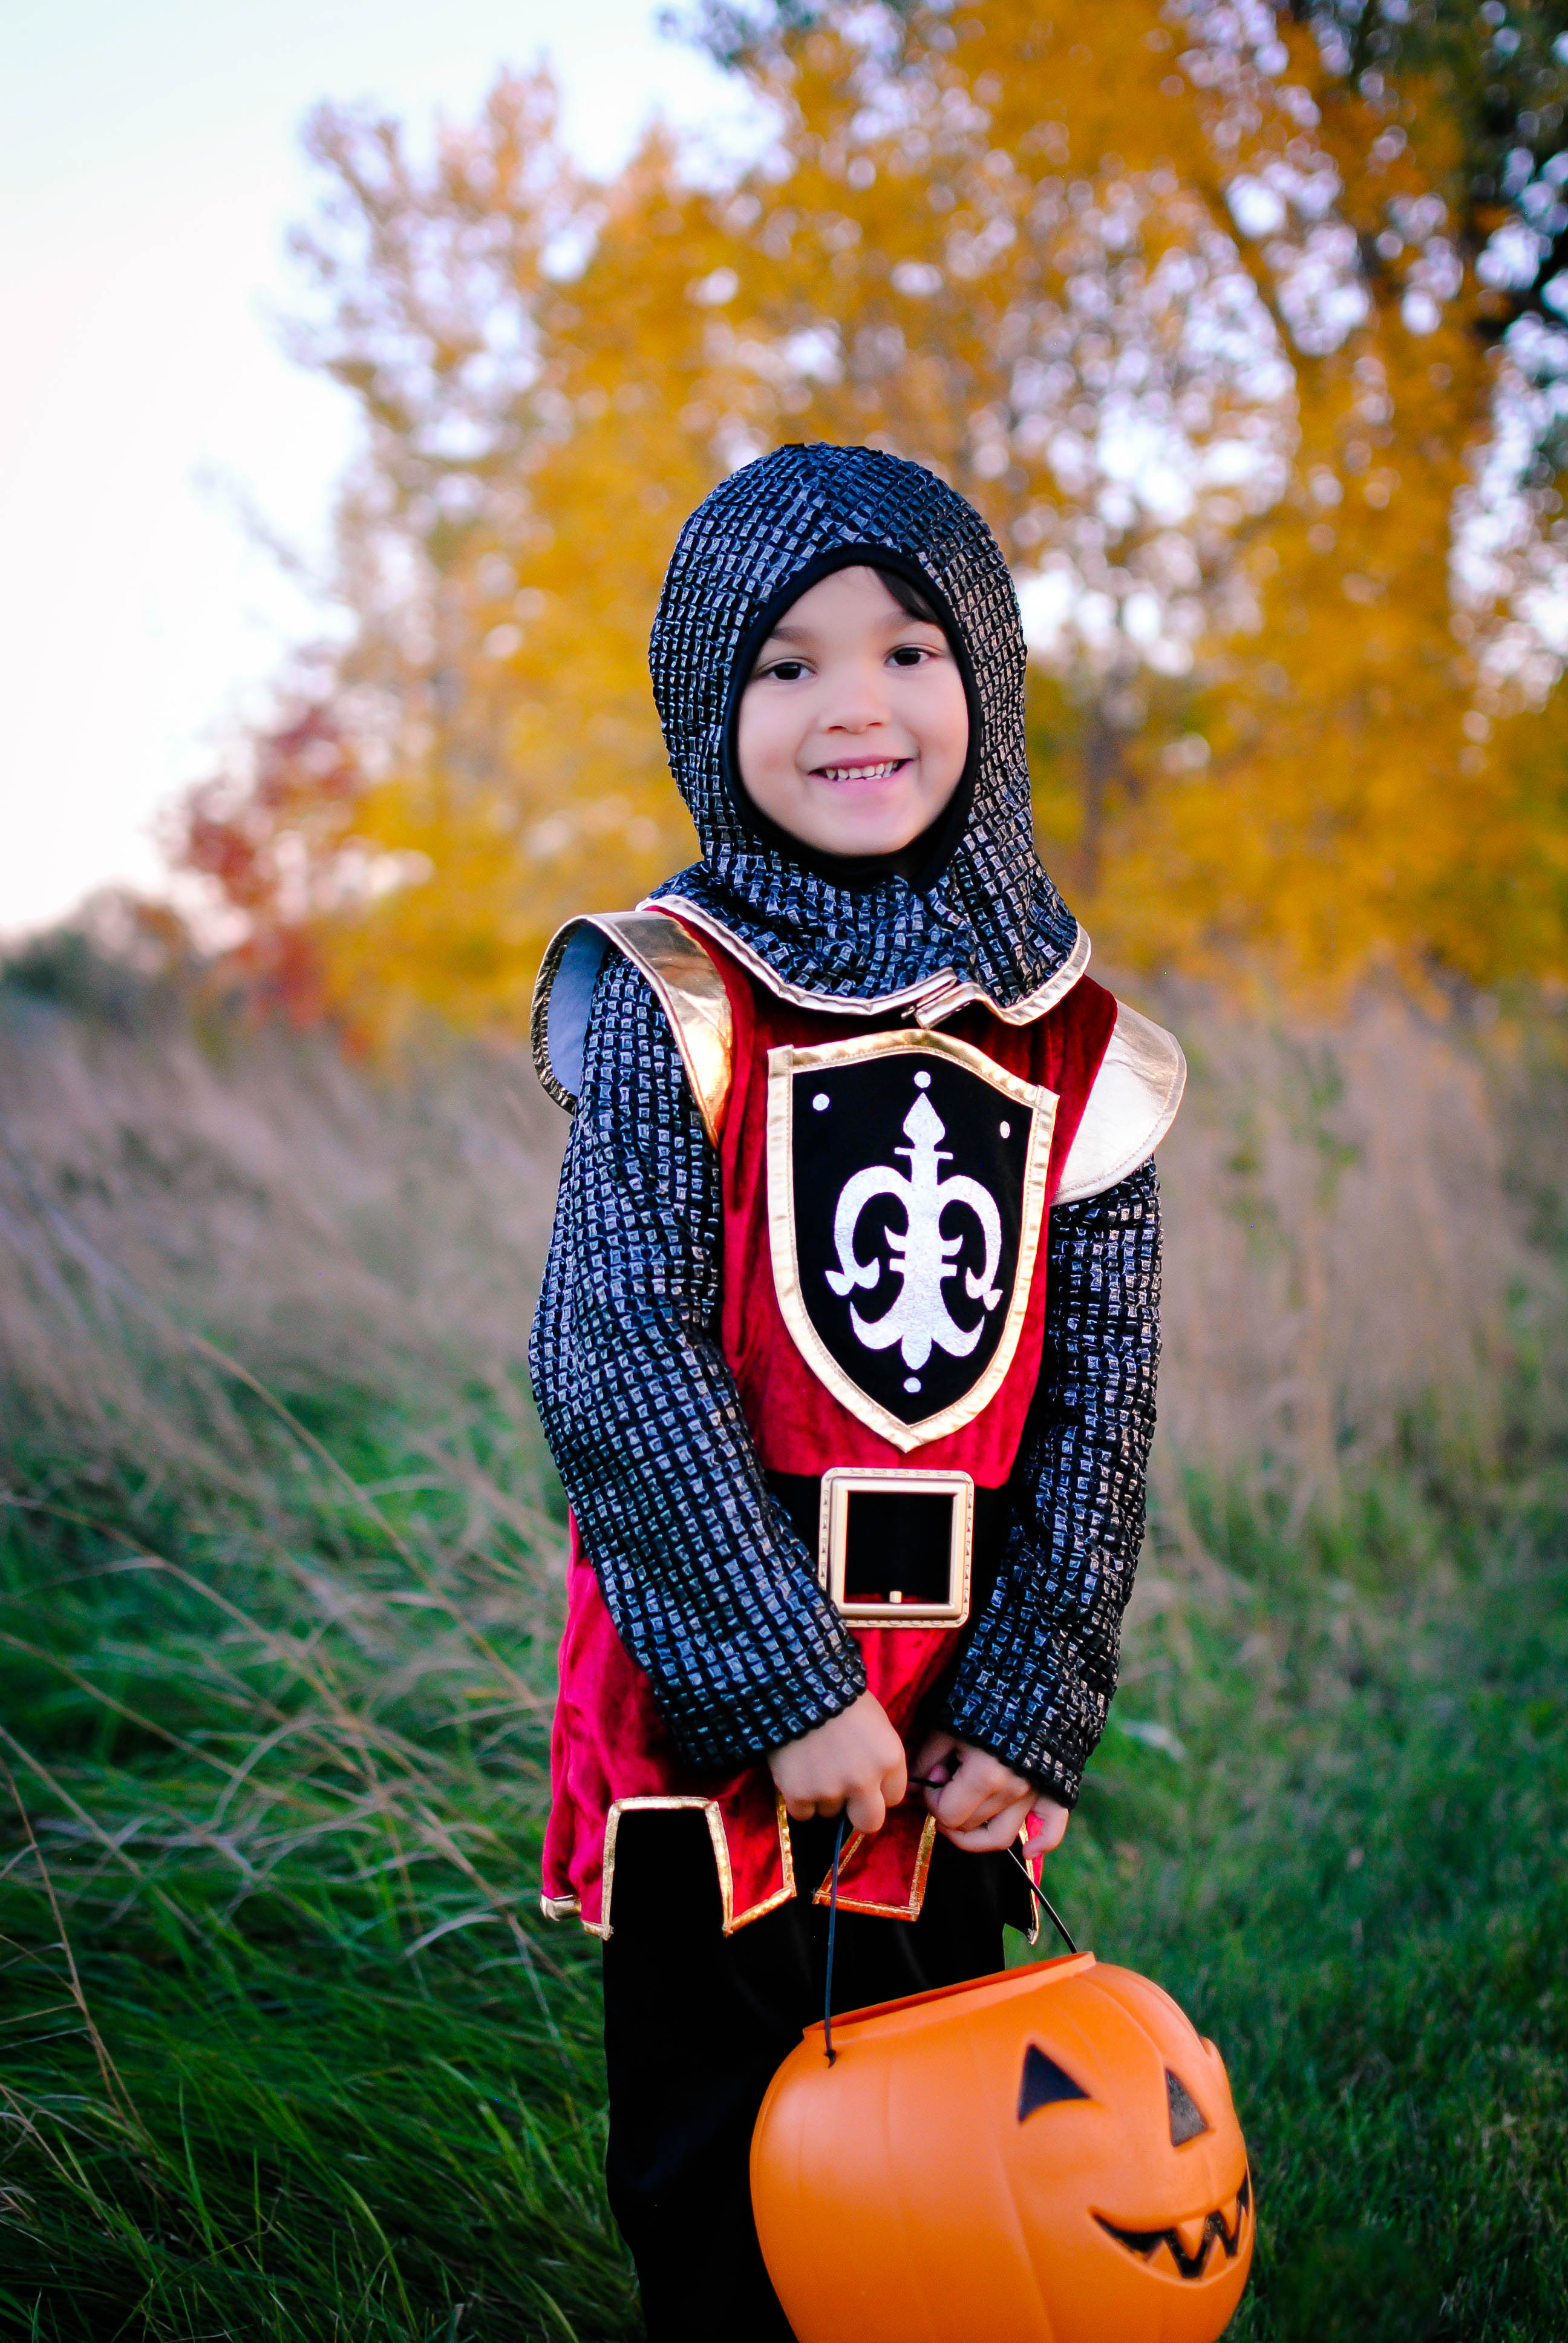 vanessa-lambert-blogger-behind-what-would-v-wear-takes-her-son-kingston-trick-or-treating-for-halloween_her-son-wears-a-knight-costume-from-marks-and-spencer_15-2